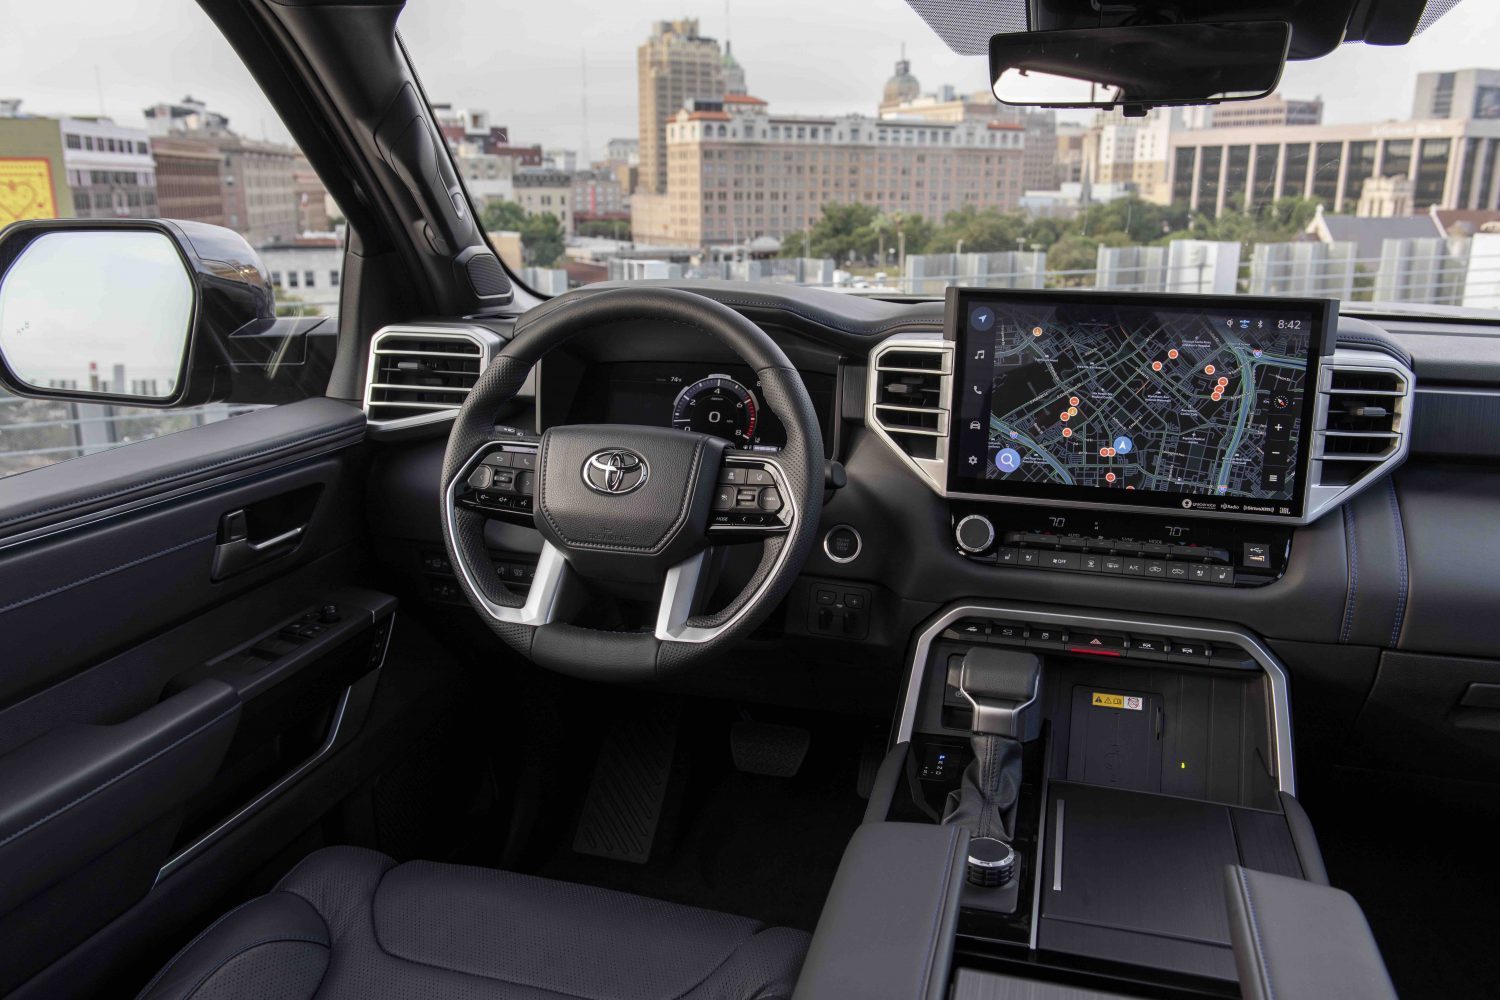 The premium interior of a Toyota Tundra pickup truck, a city visible outside its windshield.